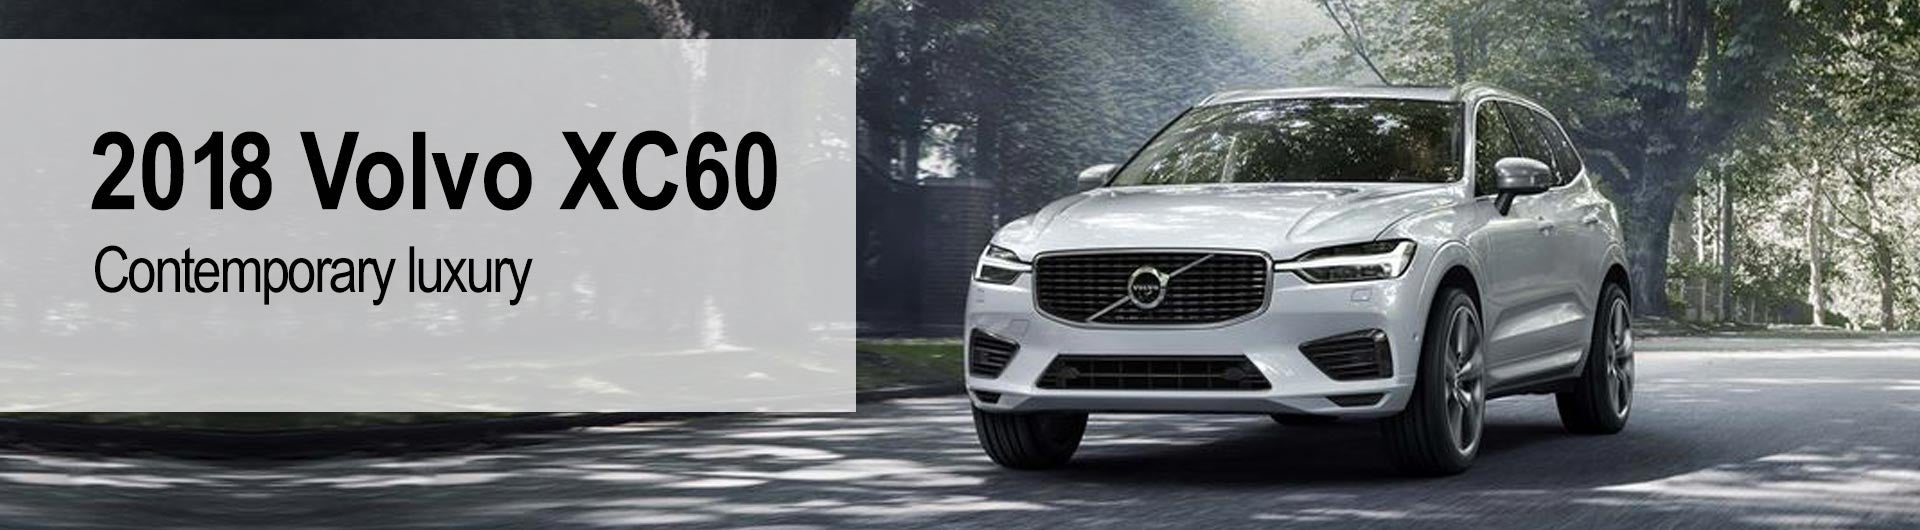 2018 Volvo XC60 Dealer in Hagerstown MD near Greencastle & Chambersburg PA & Martinsburg WV | Volvo Cars Hagerstown